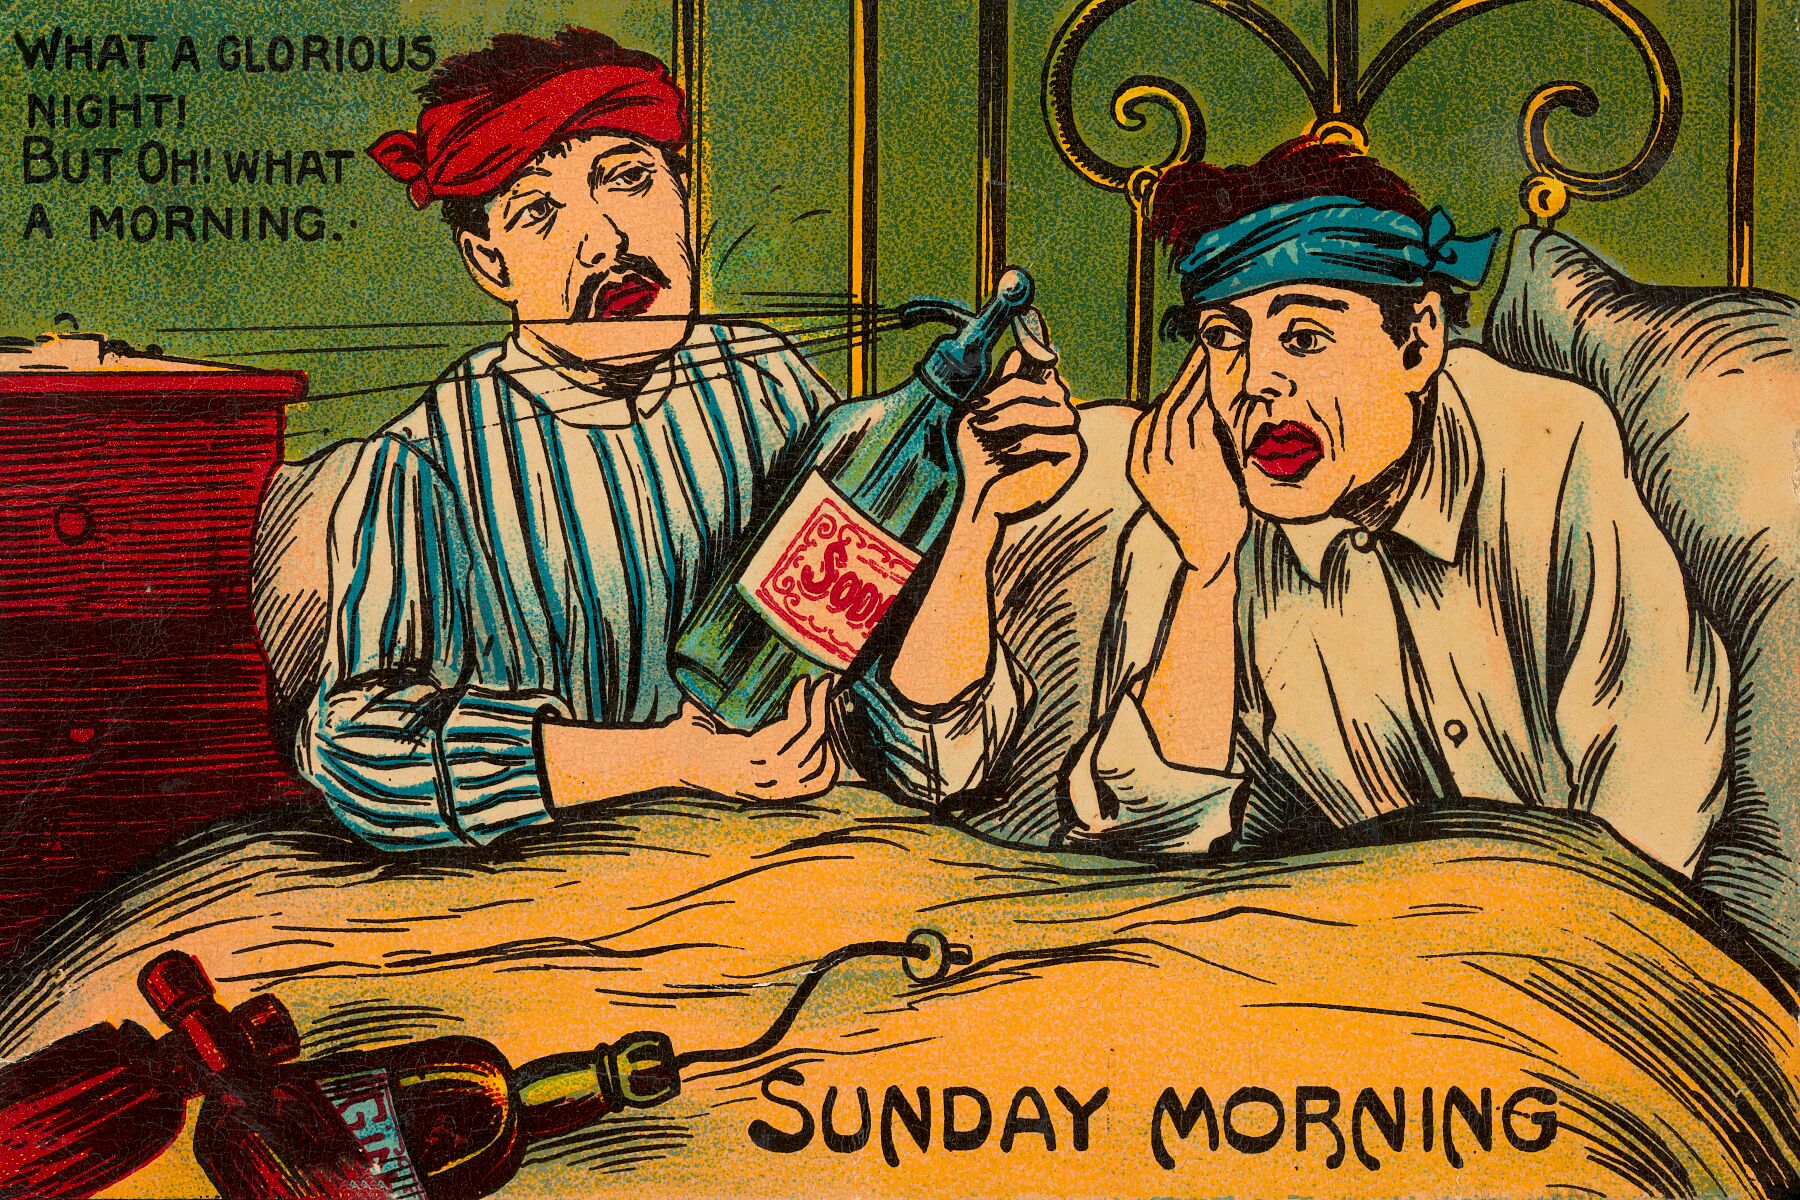 Two young men wake up in bed with headaches on Sunday morning after much drinking the night before. Colour lithograph, 1913. Date 1913